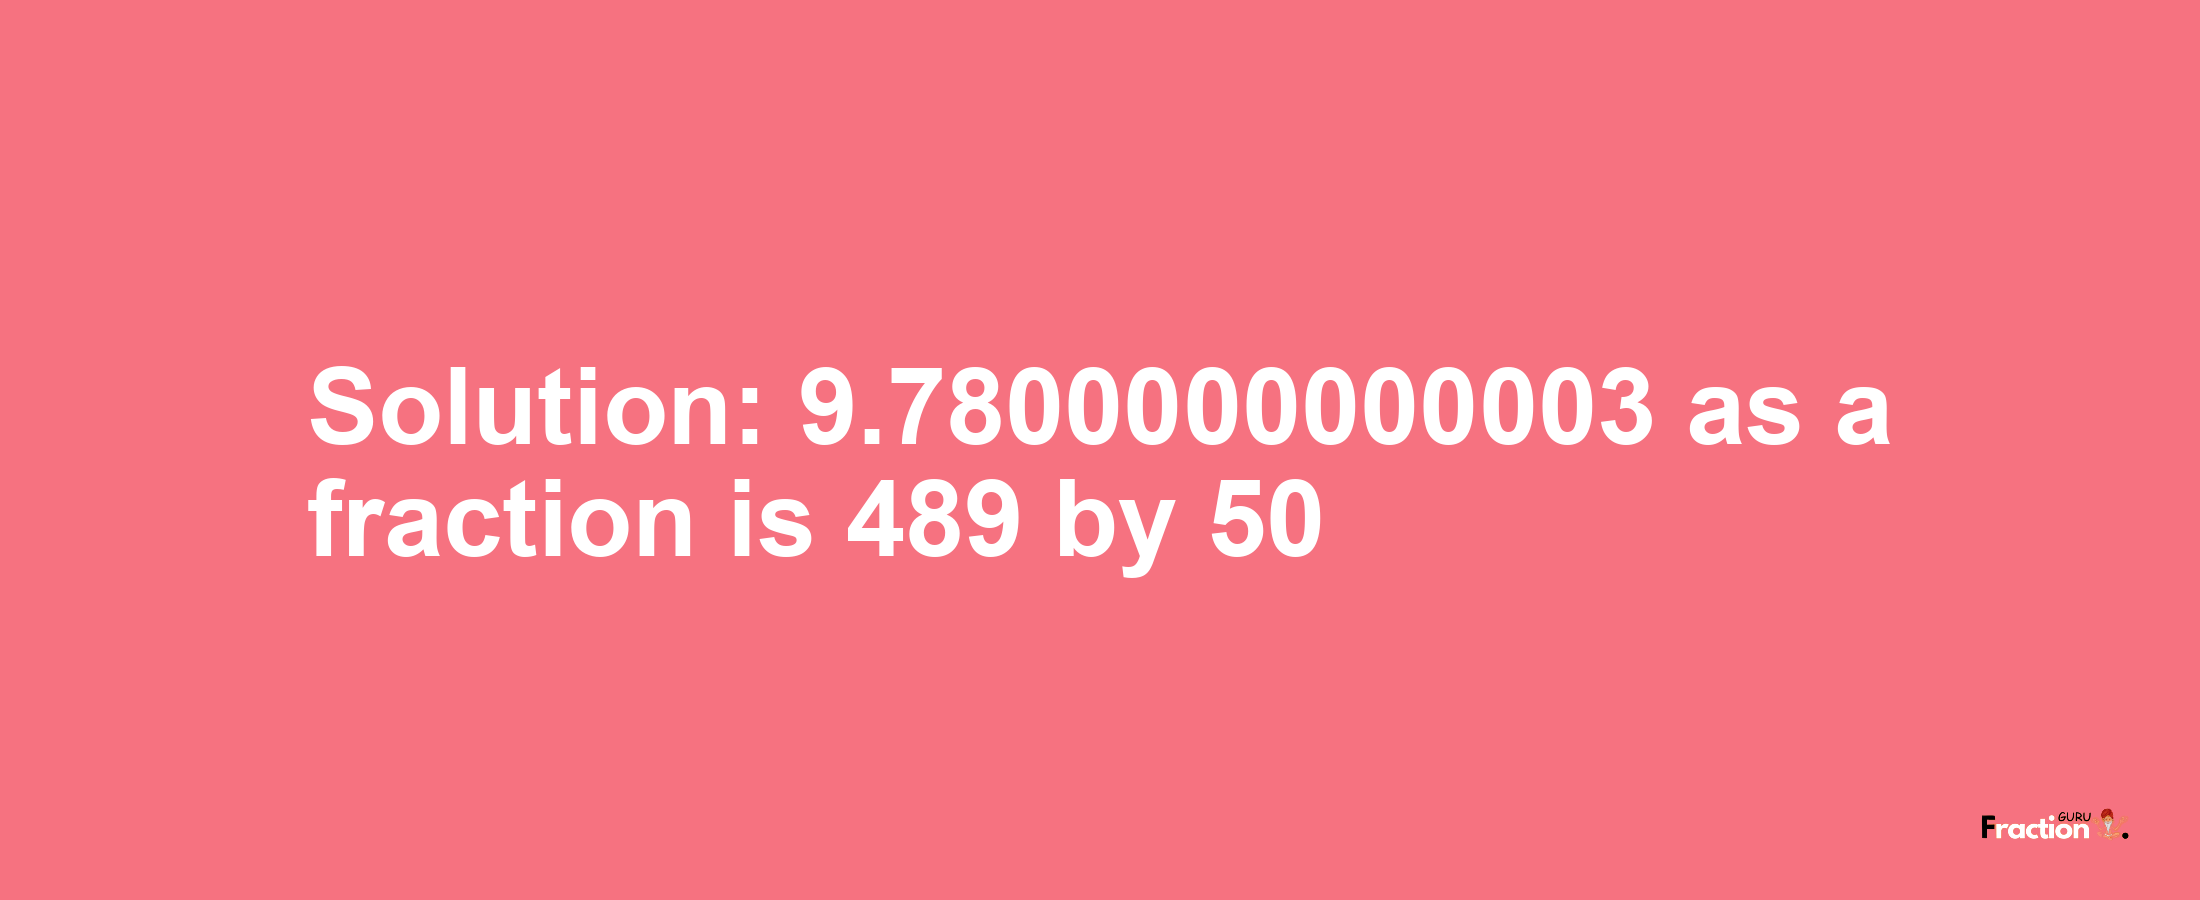 Solution:9.7800000000003 as a fraction is 489/50